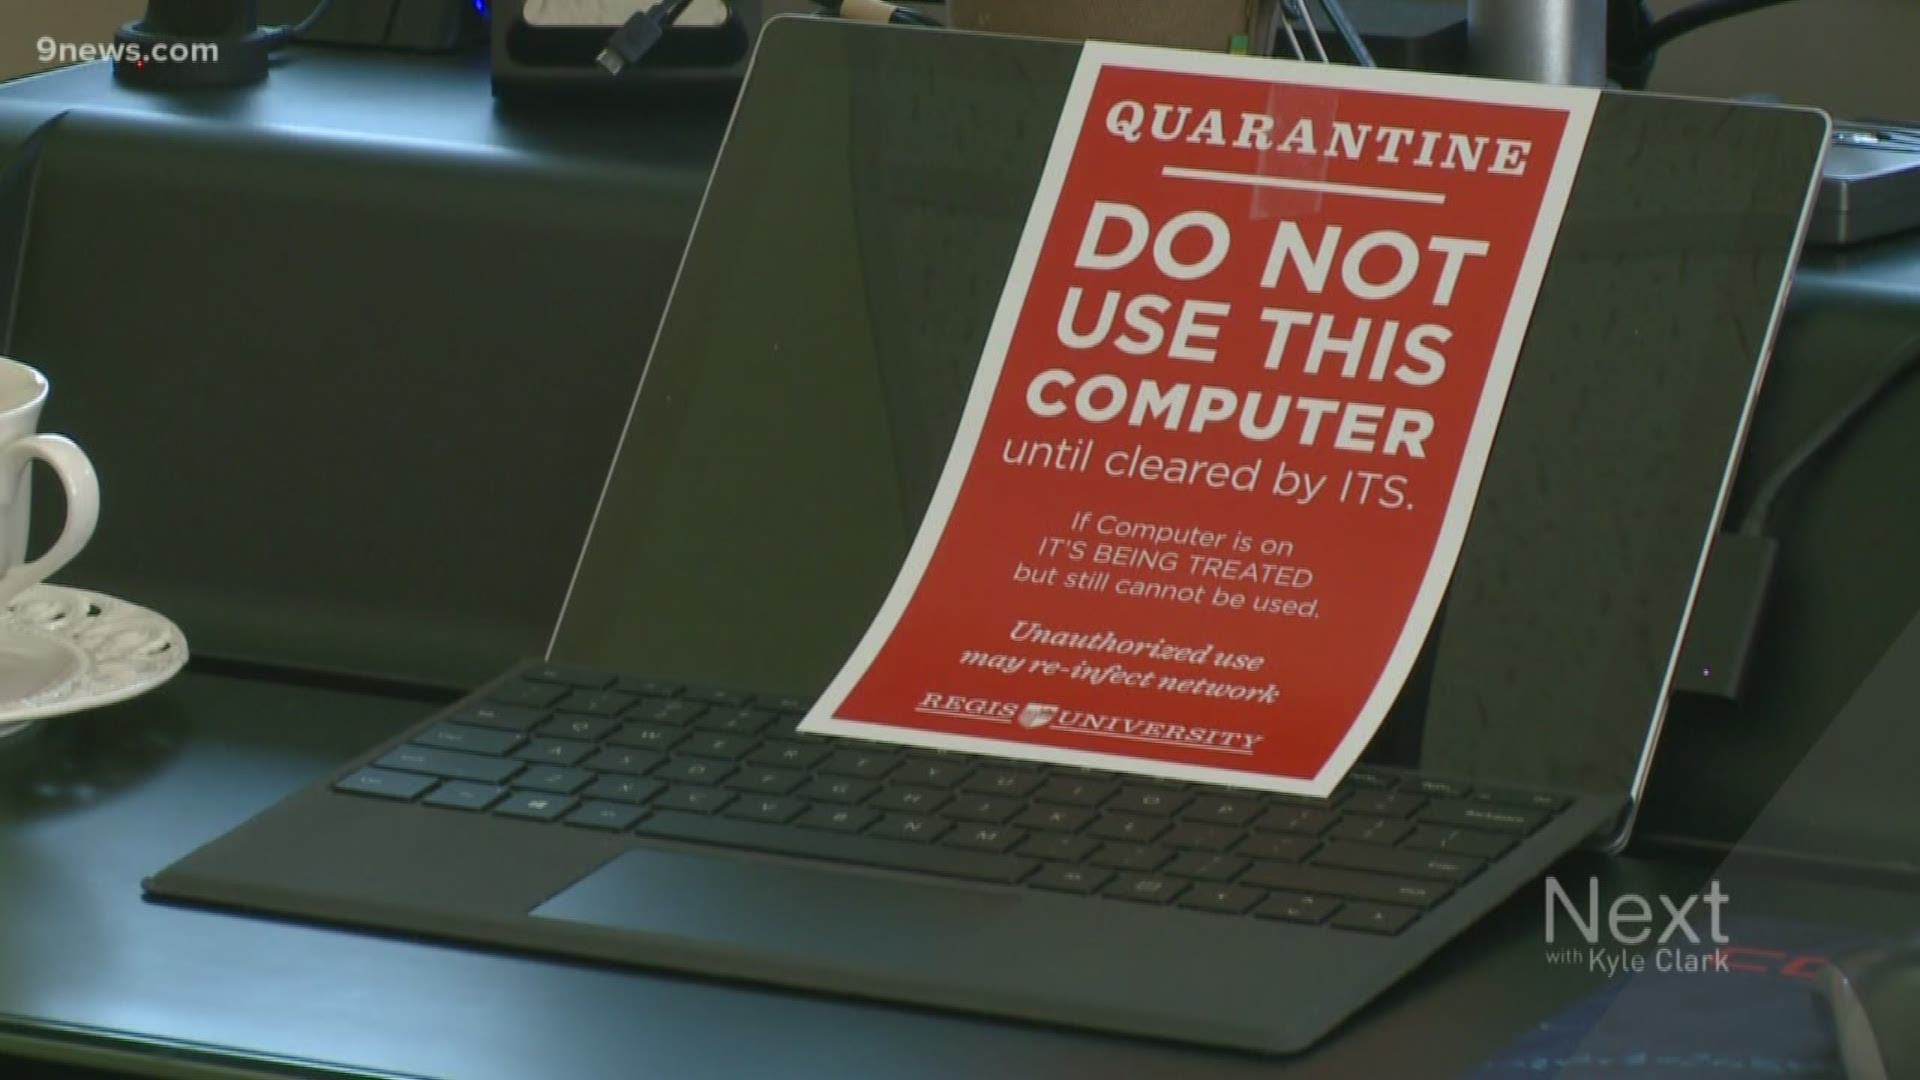 Days before the fall semester began, Regis University experienced a cyber attack. IT professionals are in the process of cleaning 1,800 campus computers.